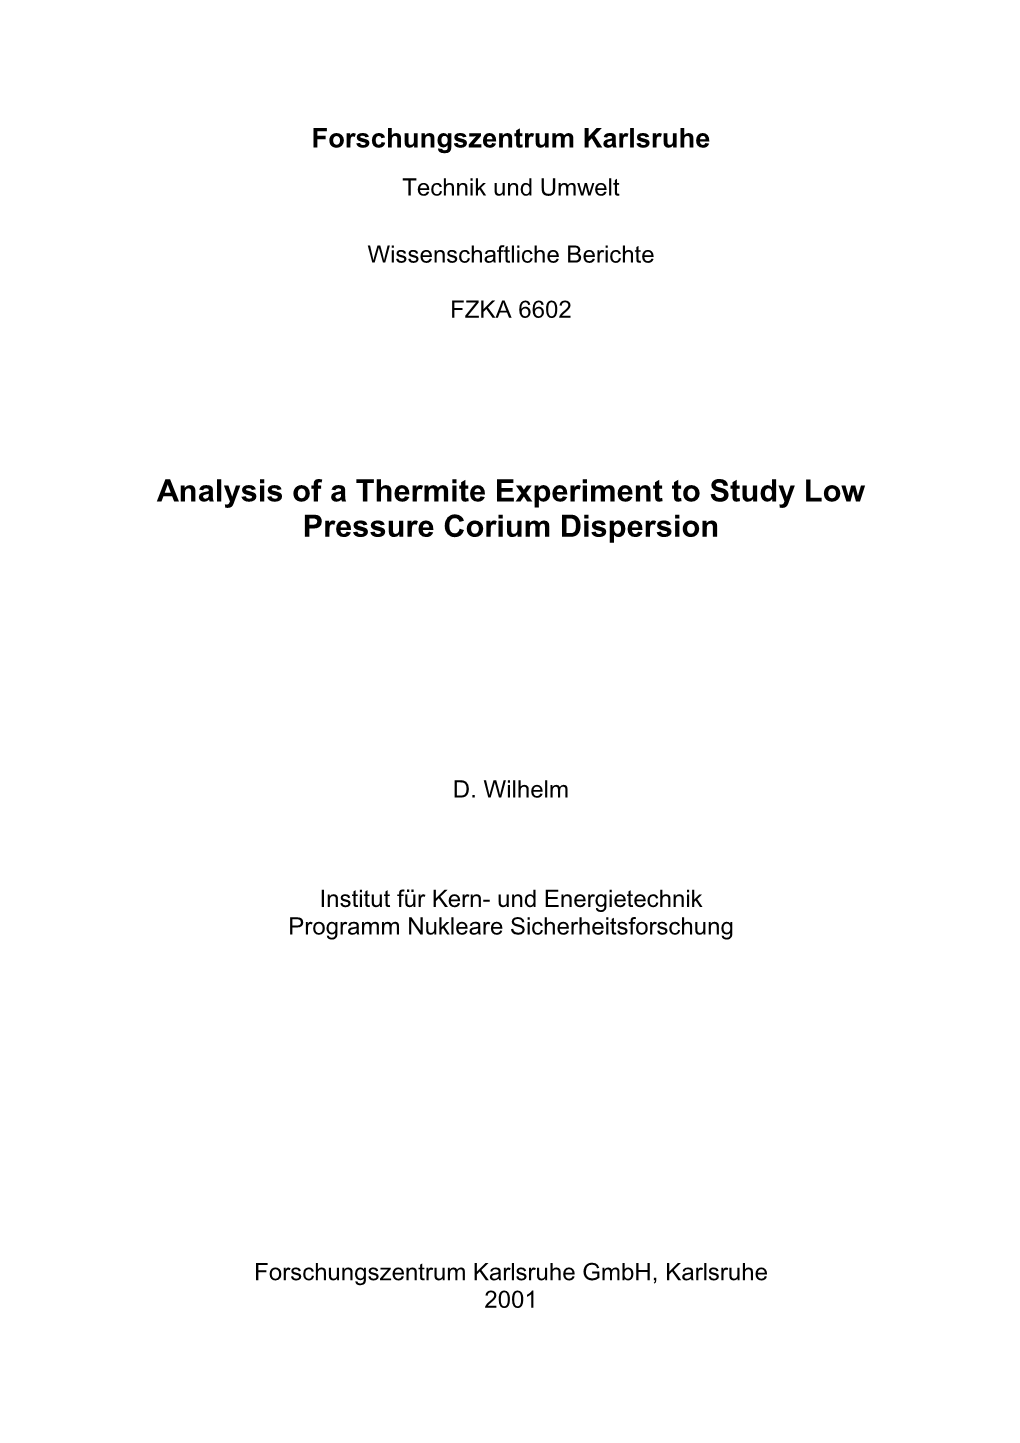 Analysis of a Thermite Experiment to Study Low Pressure Corium Dispersion